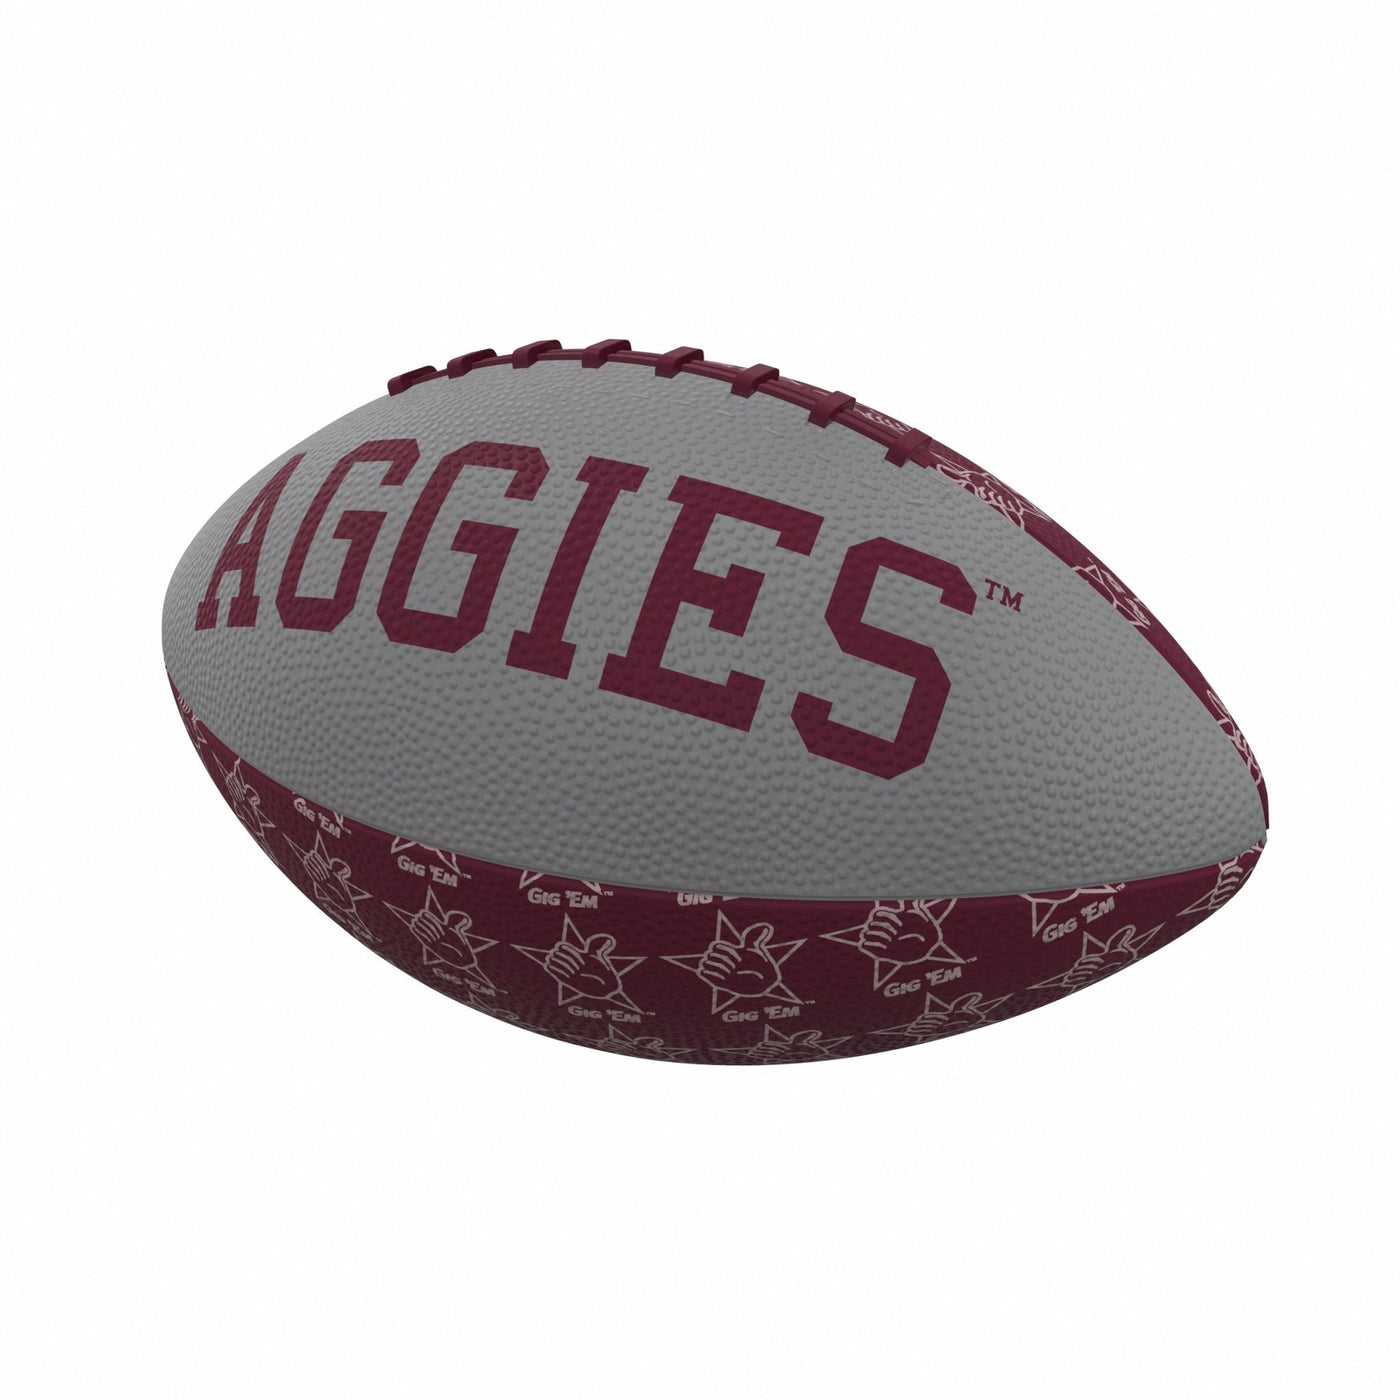 TX A&M Repeating Mini-Size Rubber Football - Logo Brands